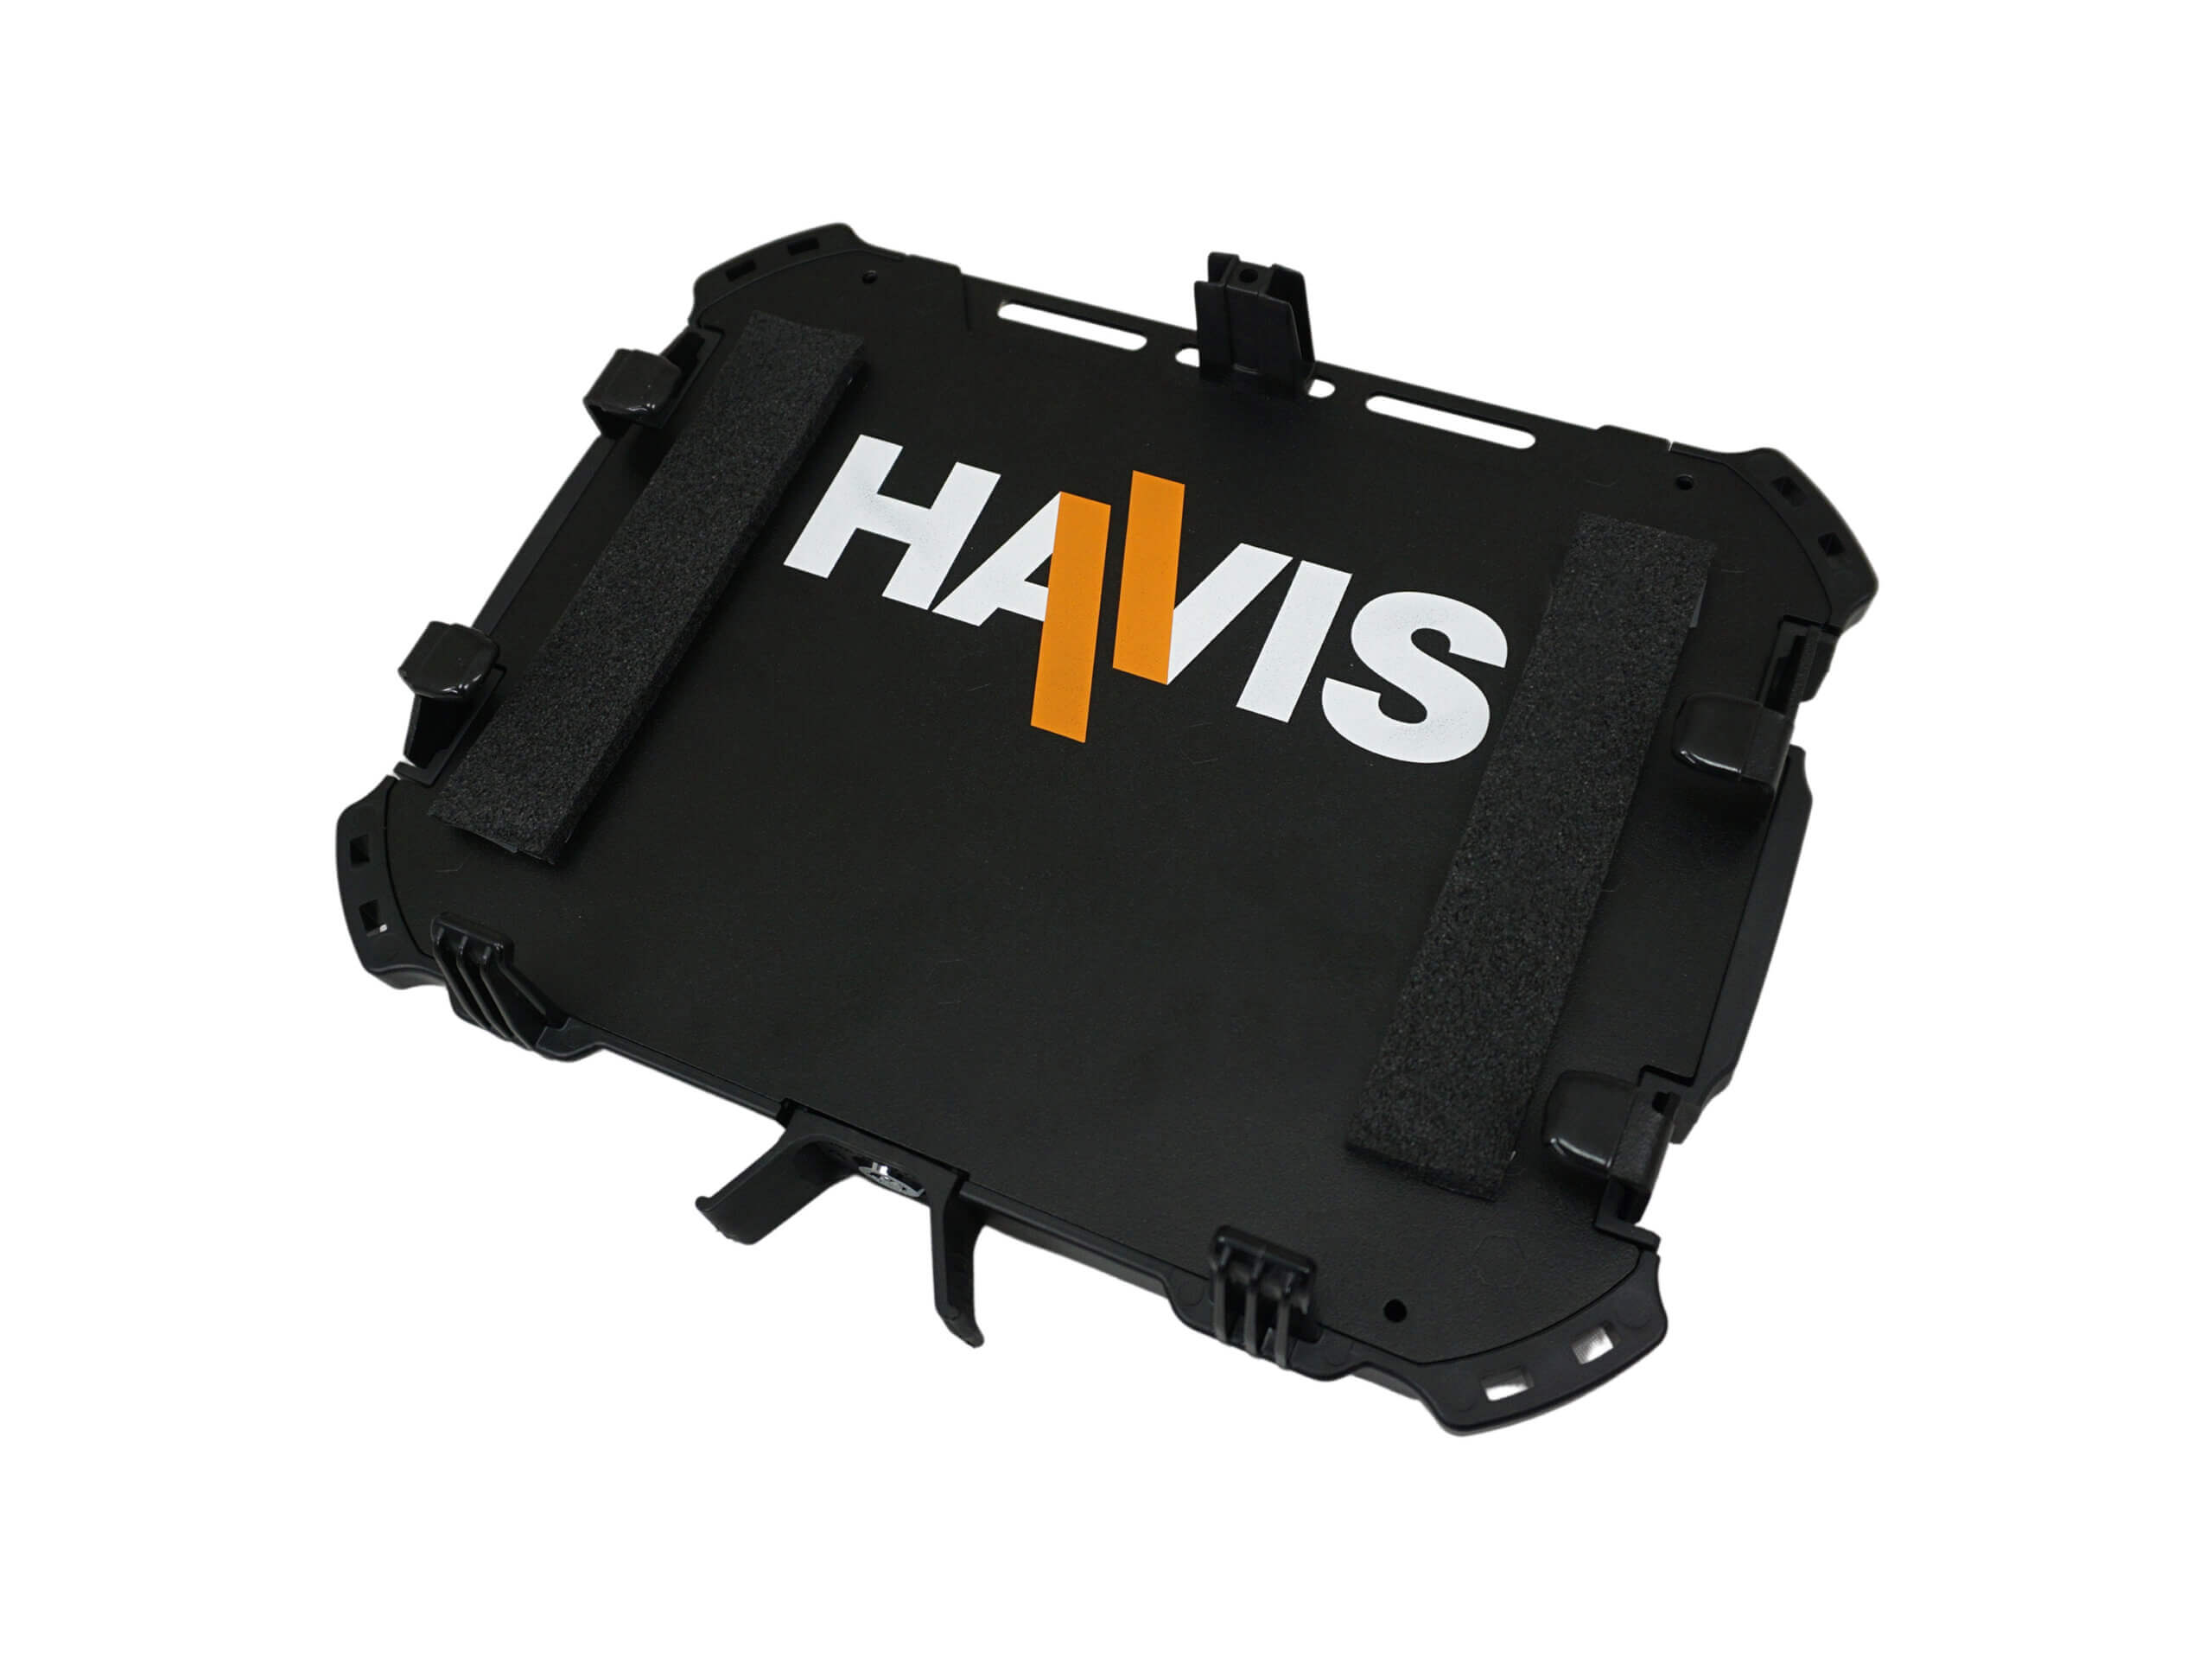 Custom Rugged Cradle for Microsoft Surface Pro 3, 4, 5, 6, or 7 (with or without UAG Case)